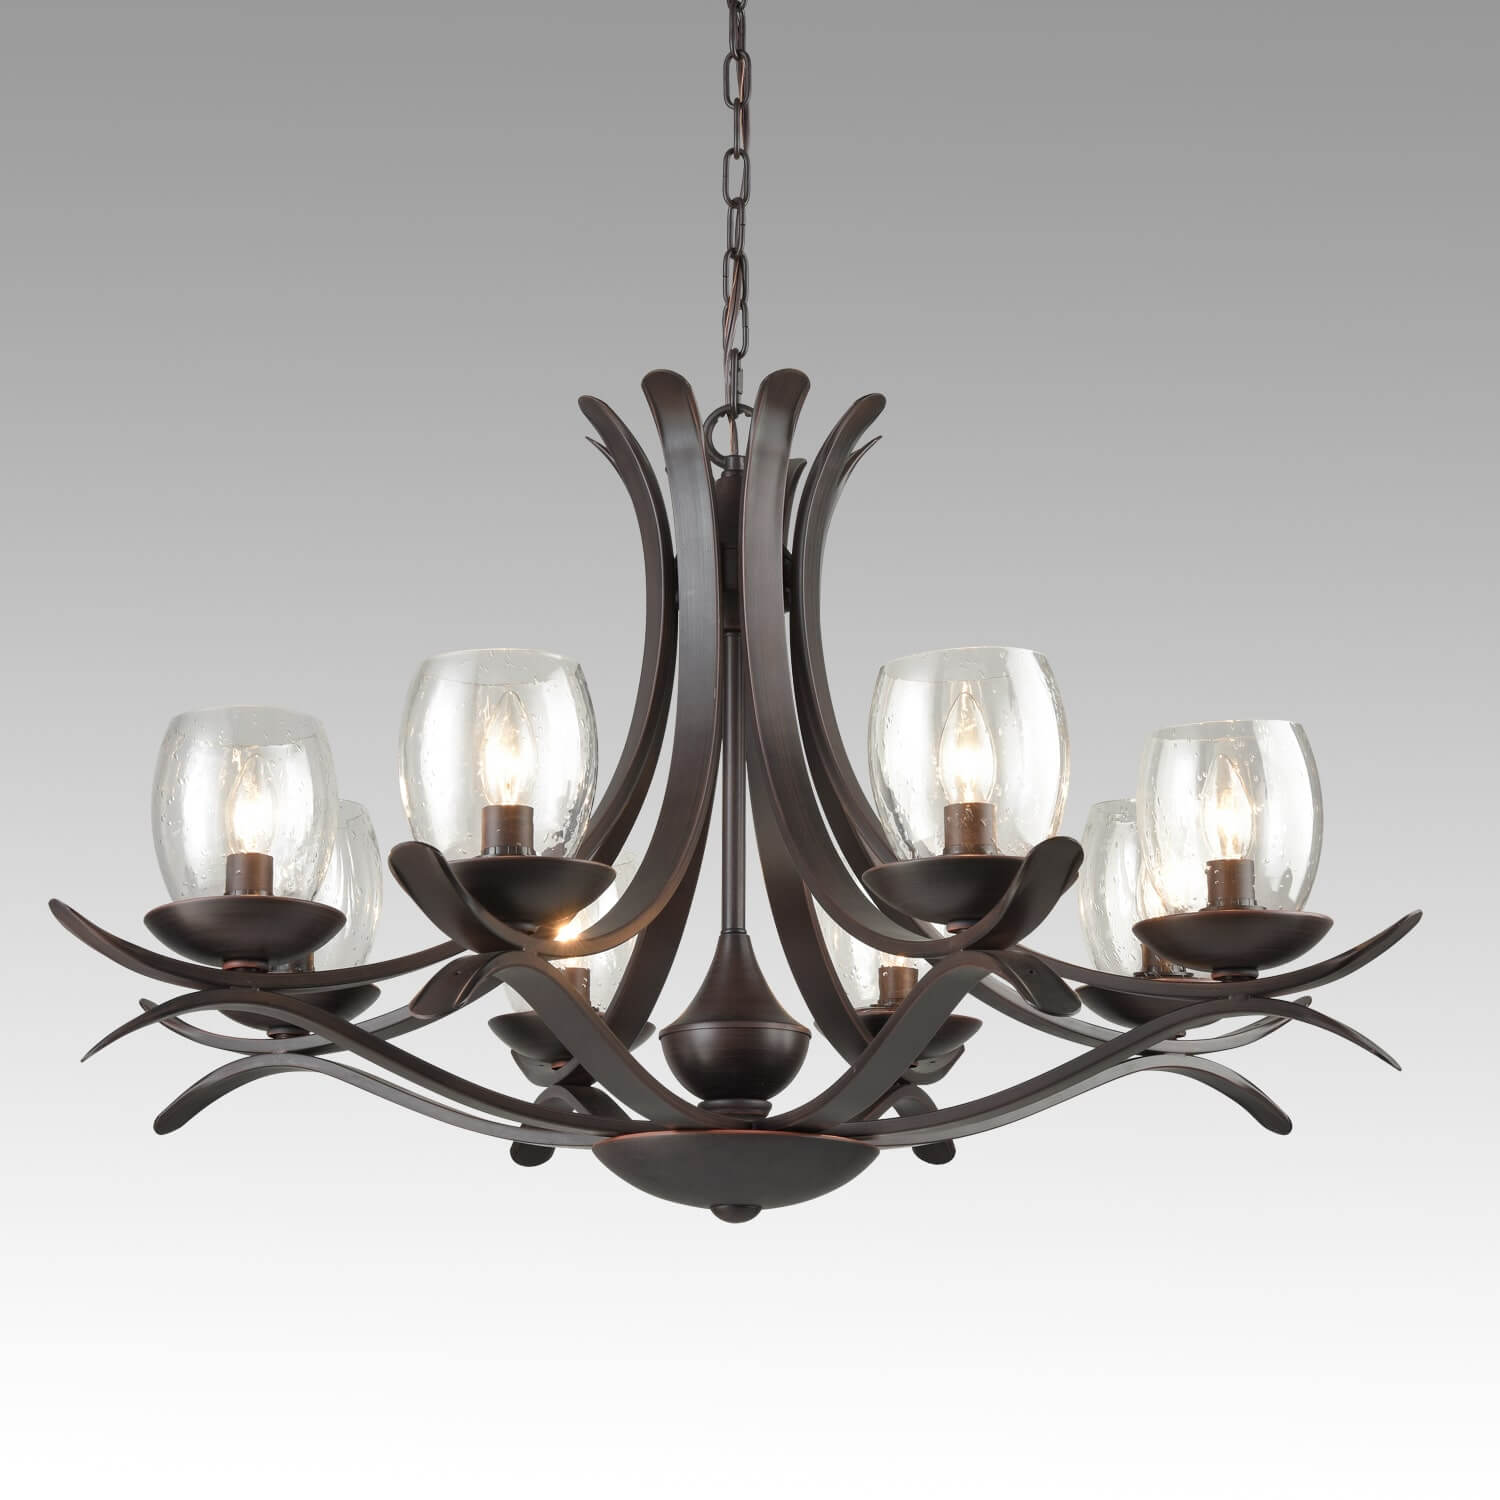 Rustic Bronze Dining Room Chandelier with Seeded Glass - 8 Light